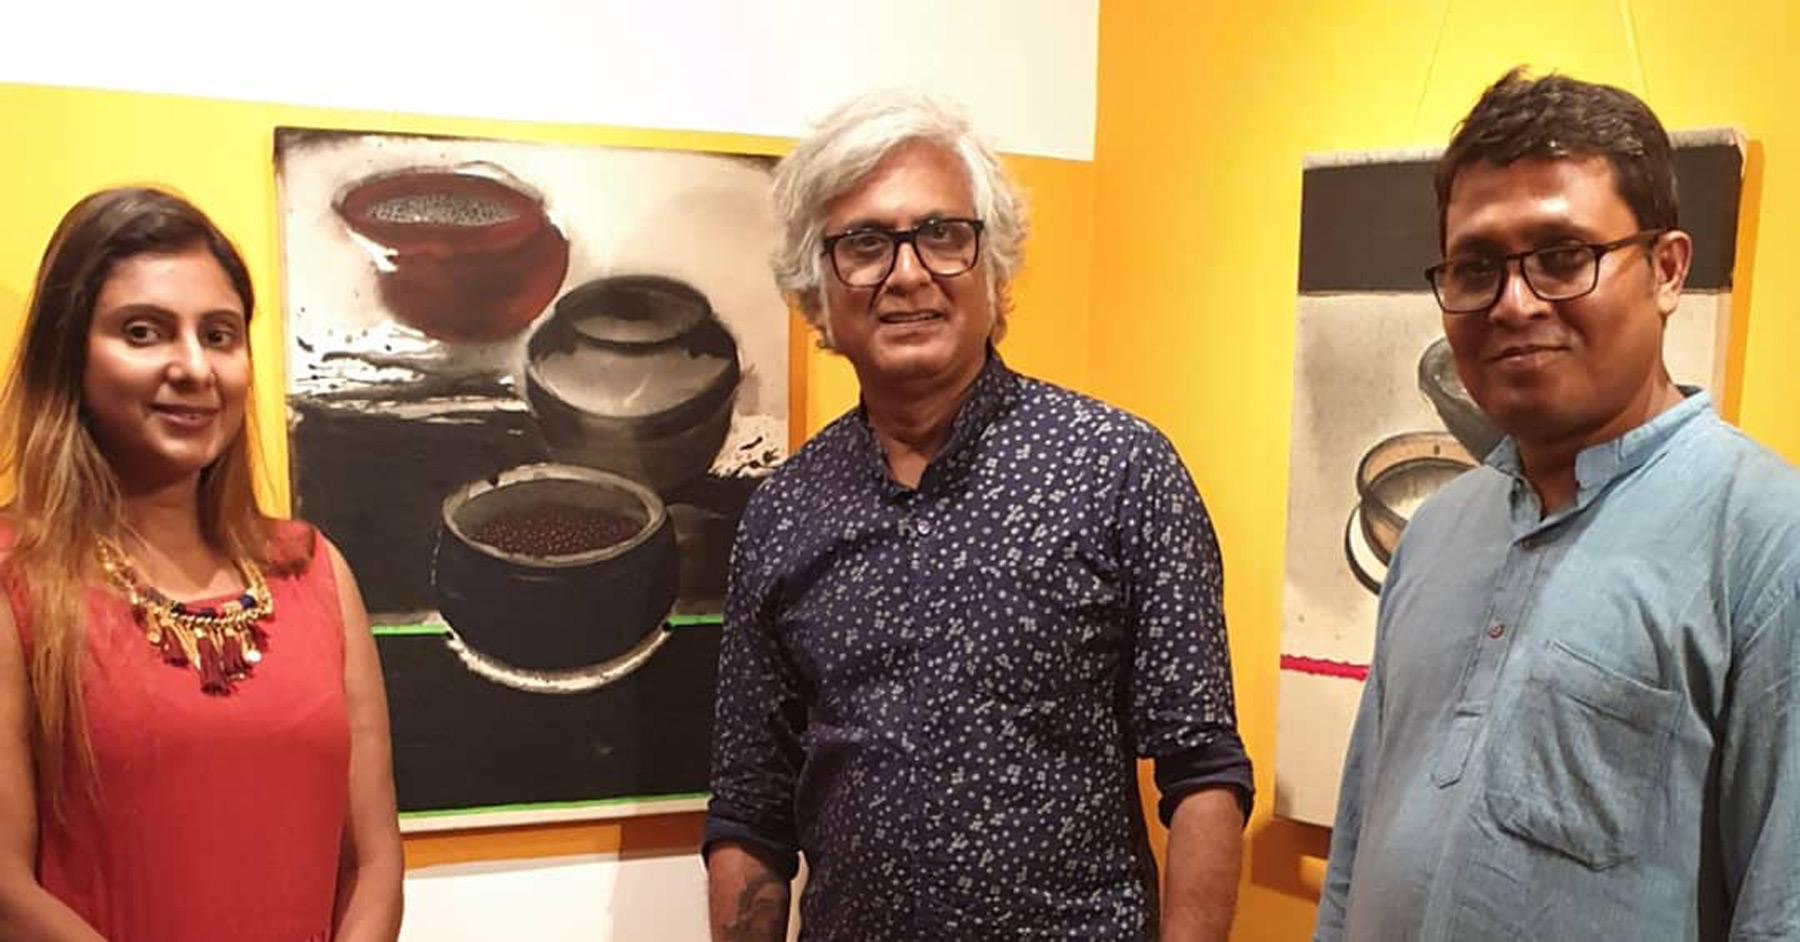 Madhu Basu  -  Magma n°143 -  25.75 X 21.25 inches (unframed size) 
Acrylic & Pigment on canvas
Inclusive of shipment in roll form.

Vessels and pots being of importance in Madhu Basu's works talk about the basic needs of everyday life. The need of